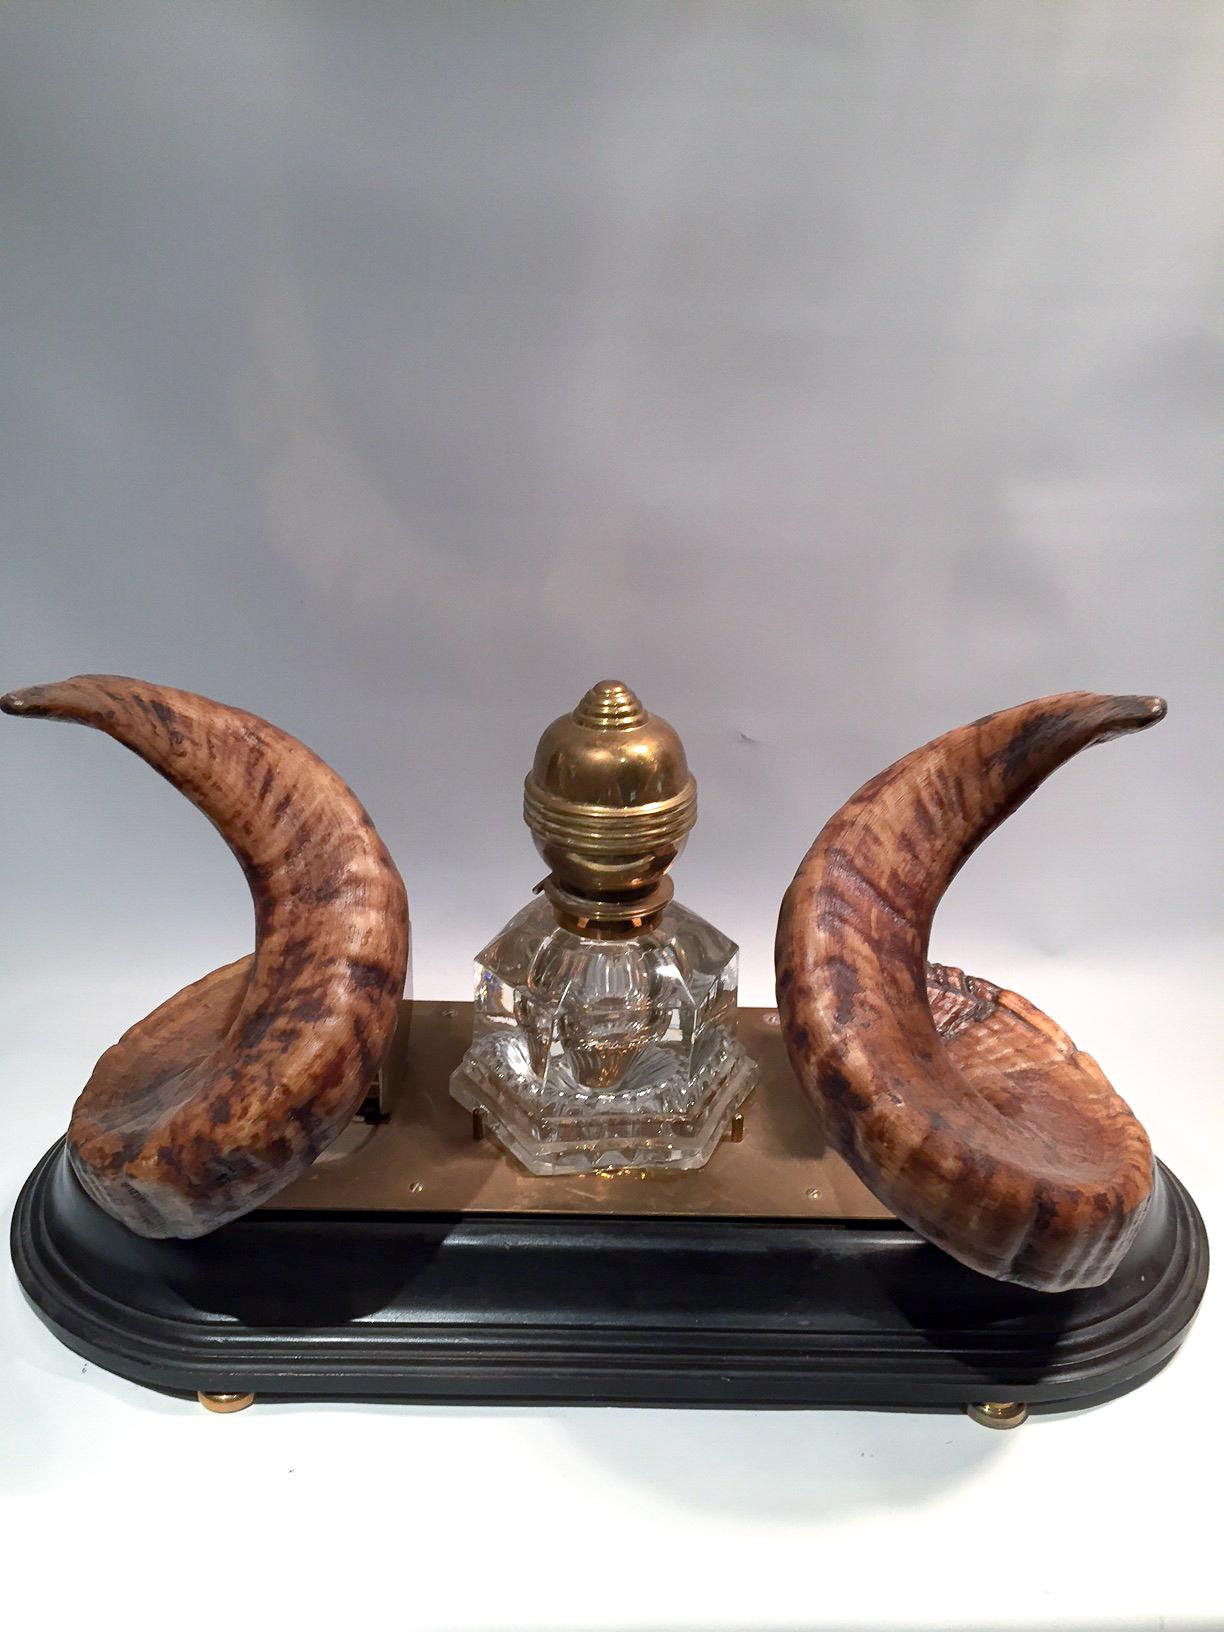 Victorian 19th Century Ram's Horn Decorated Inkwell, Possibly Scottish